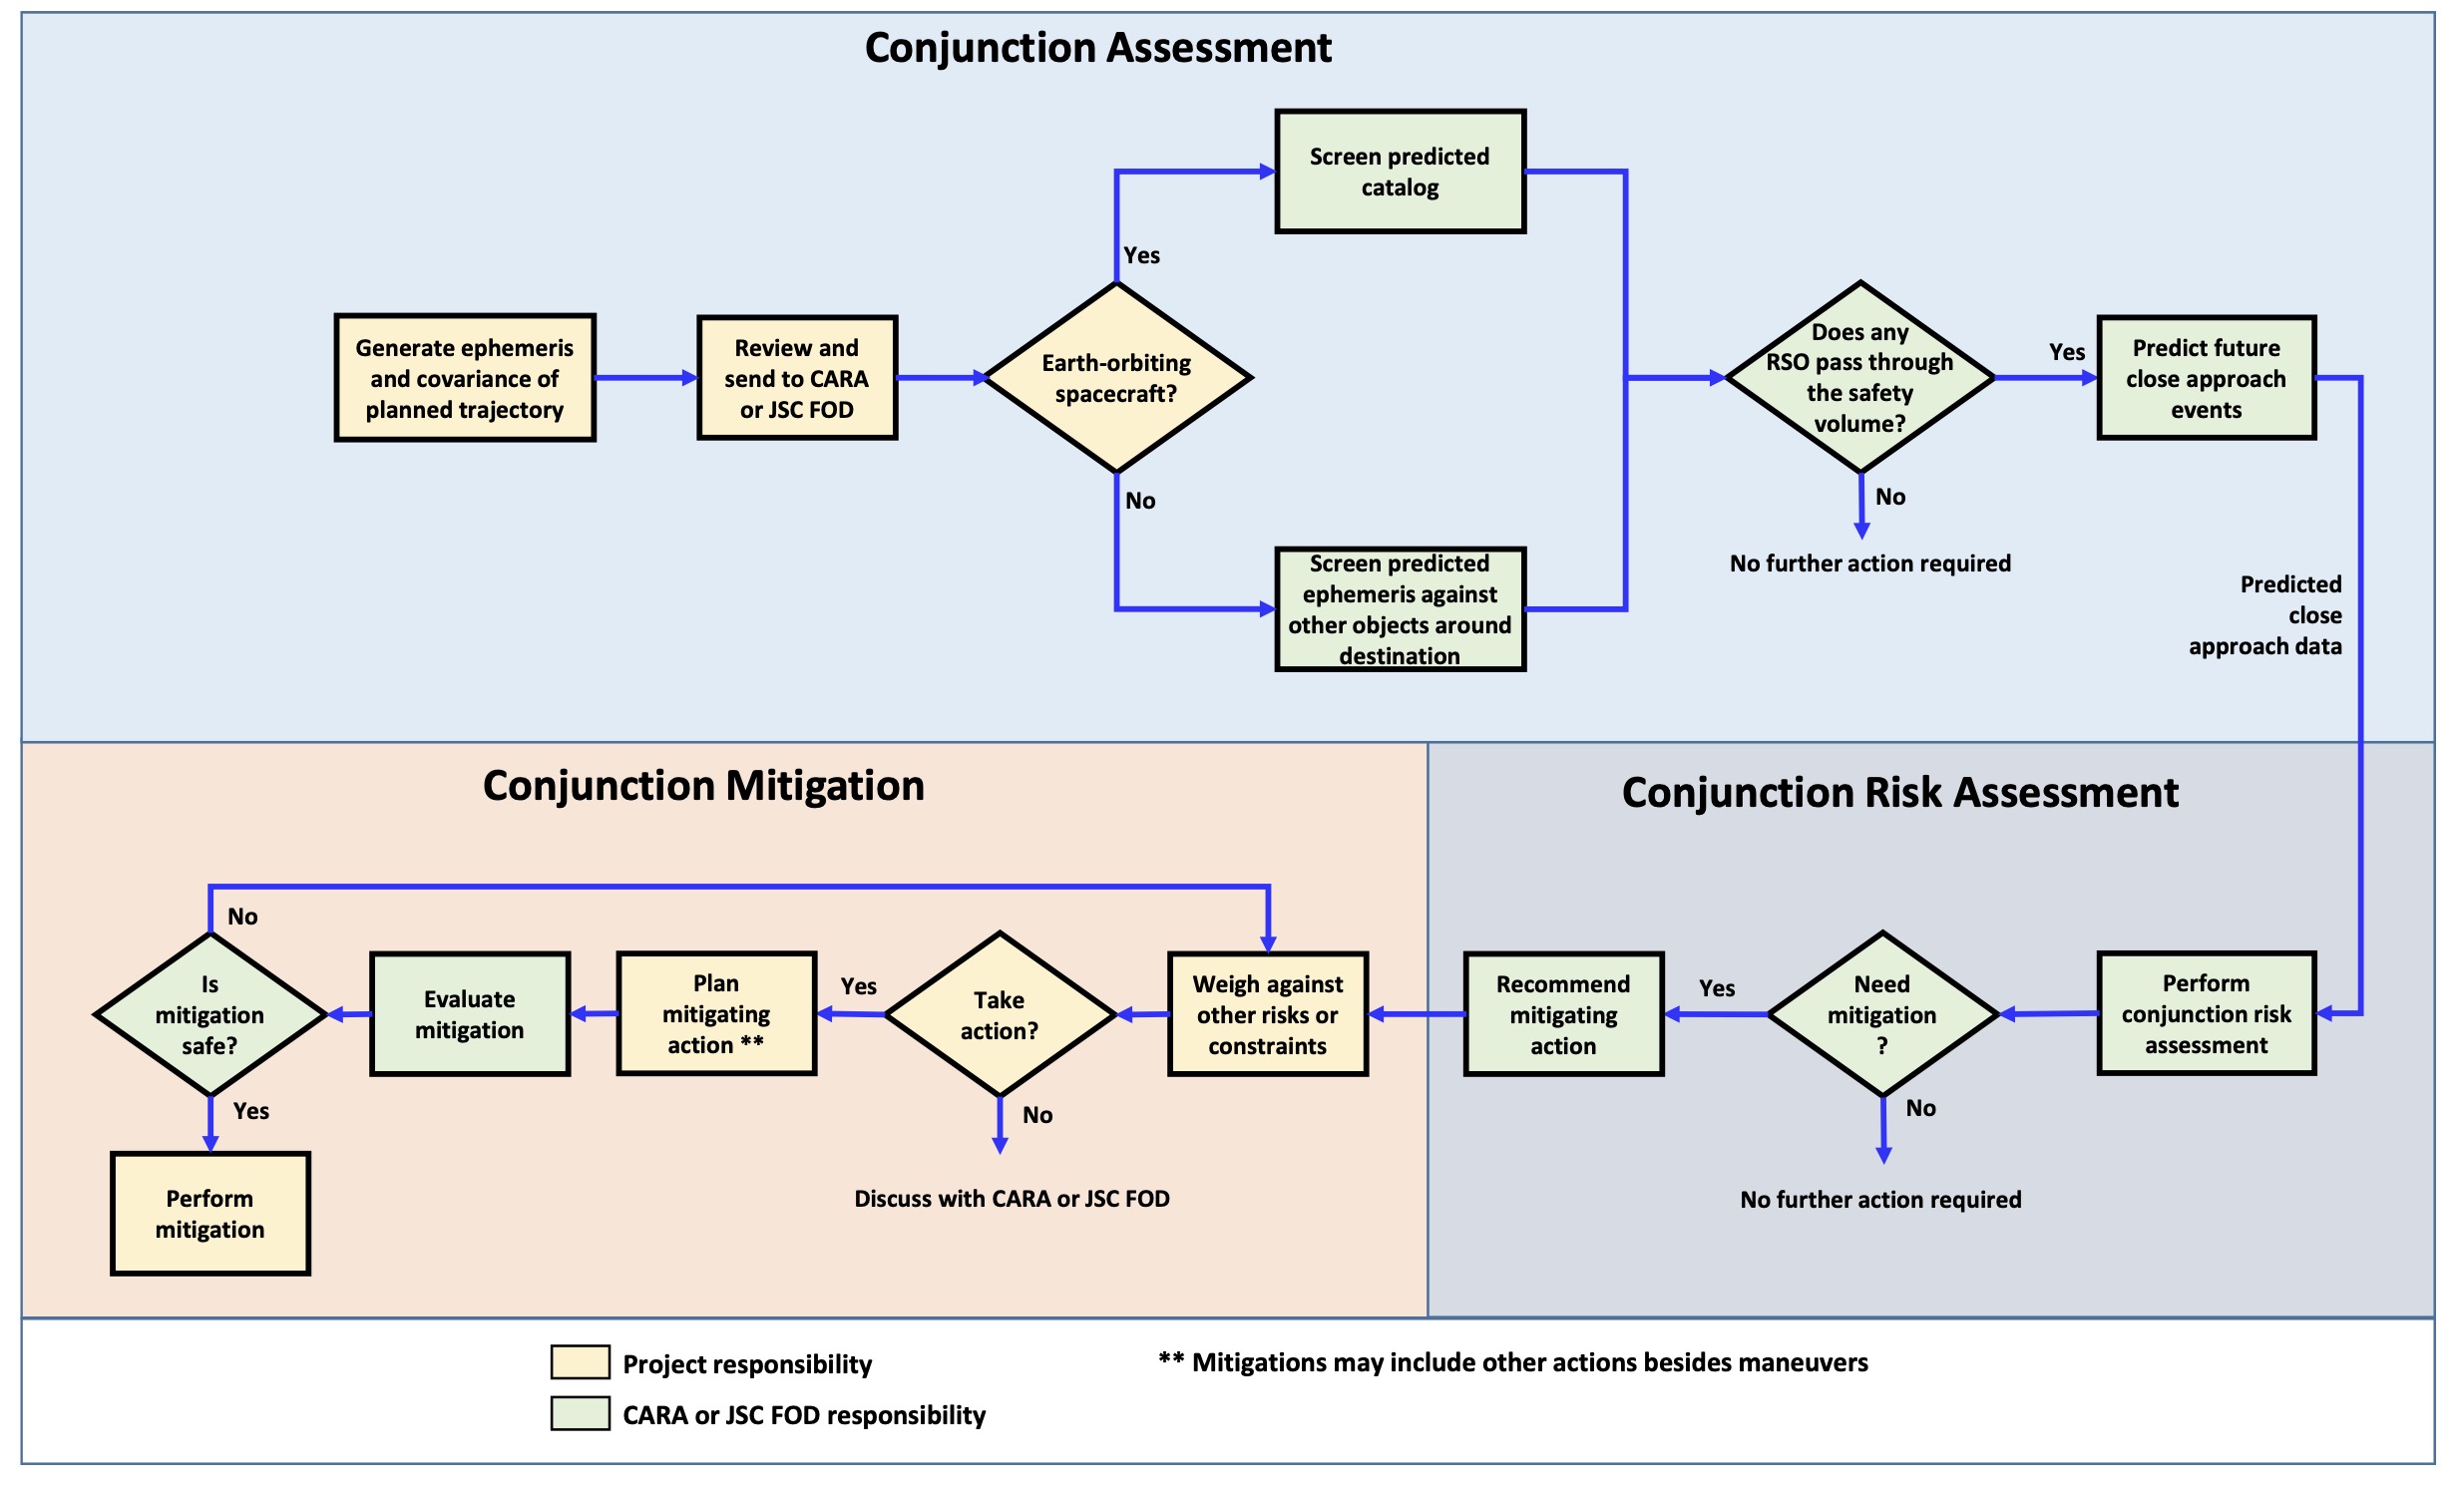 Figure 4-1 Conjunction Analysis and Mitigation Process Flowchart.